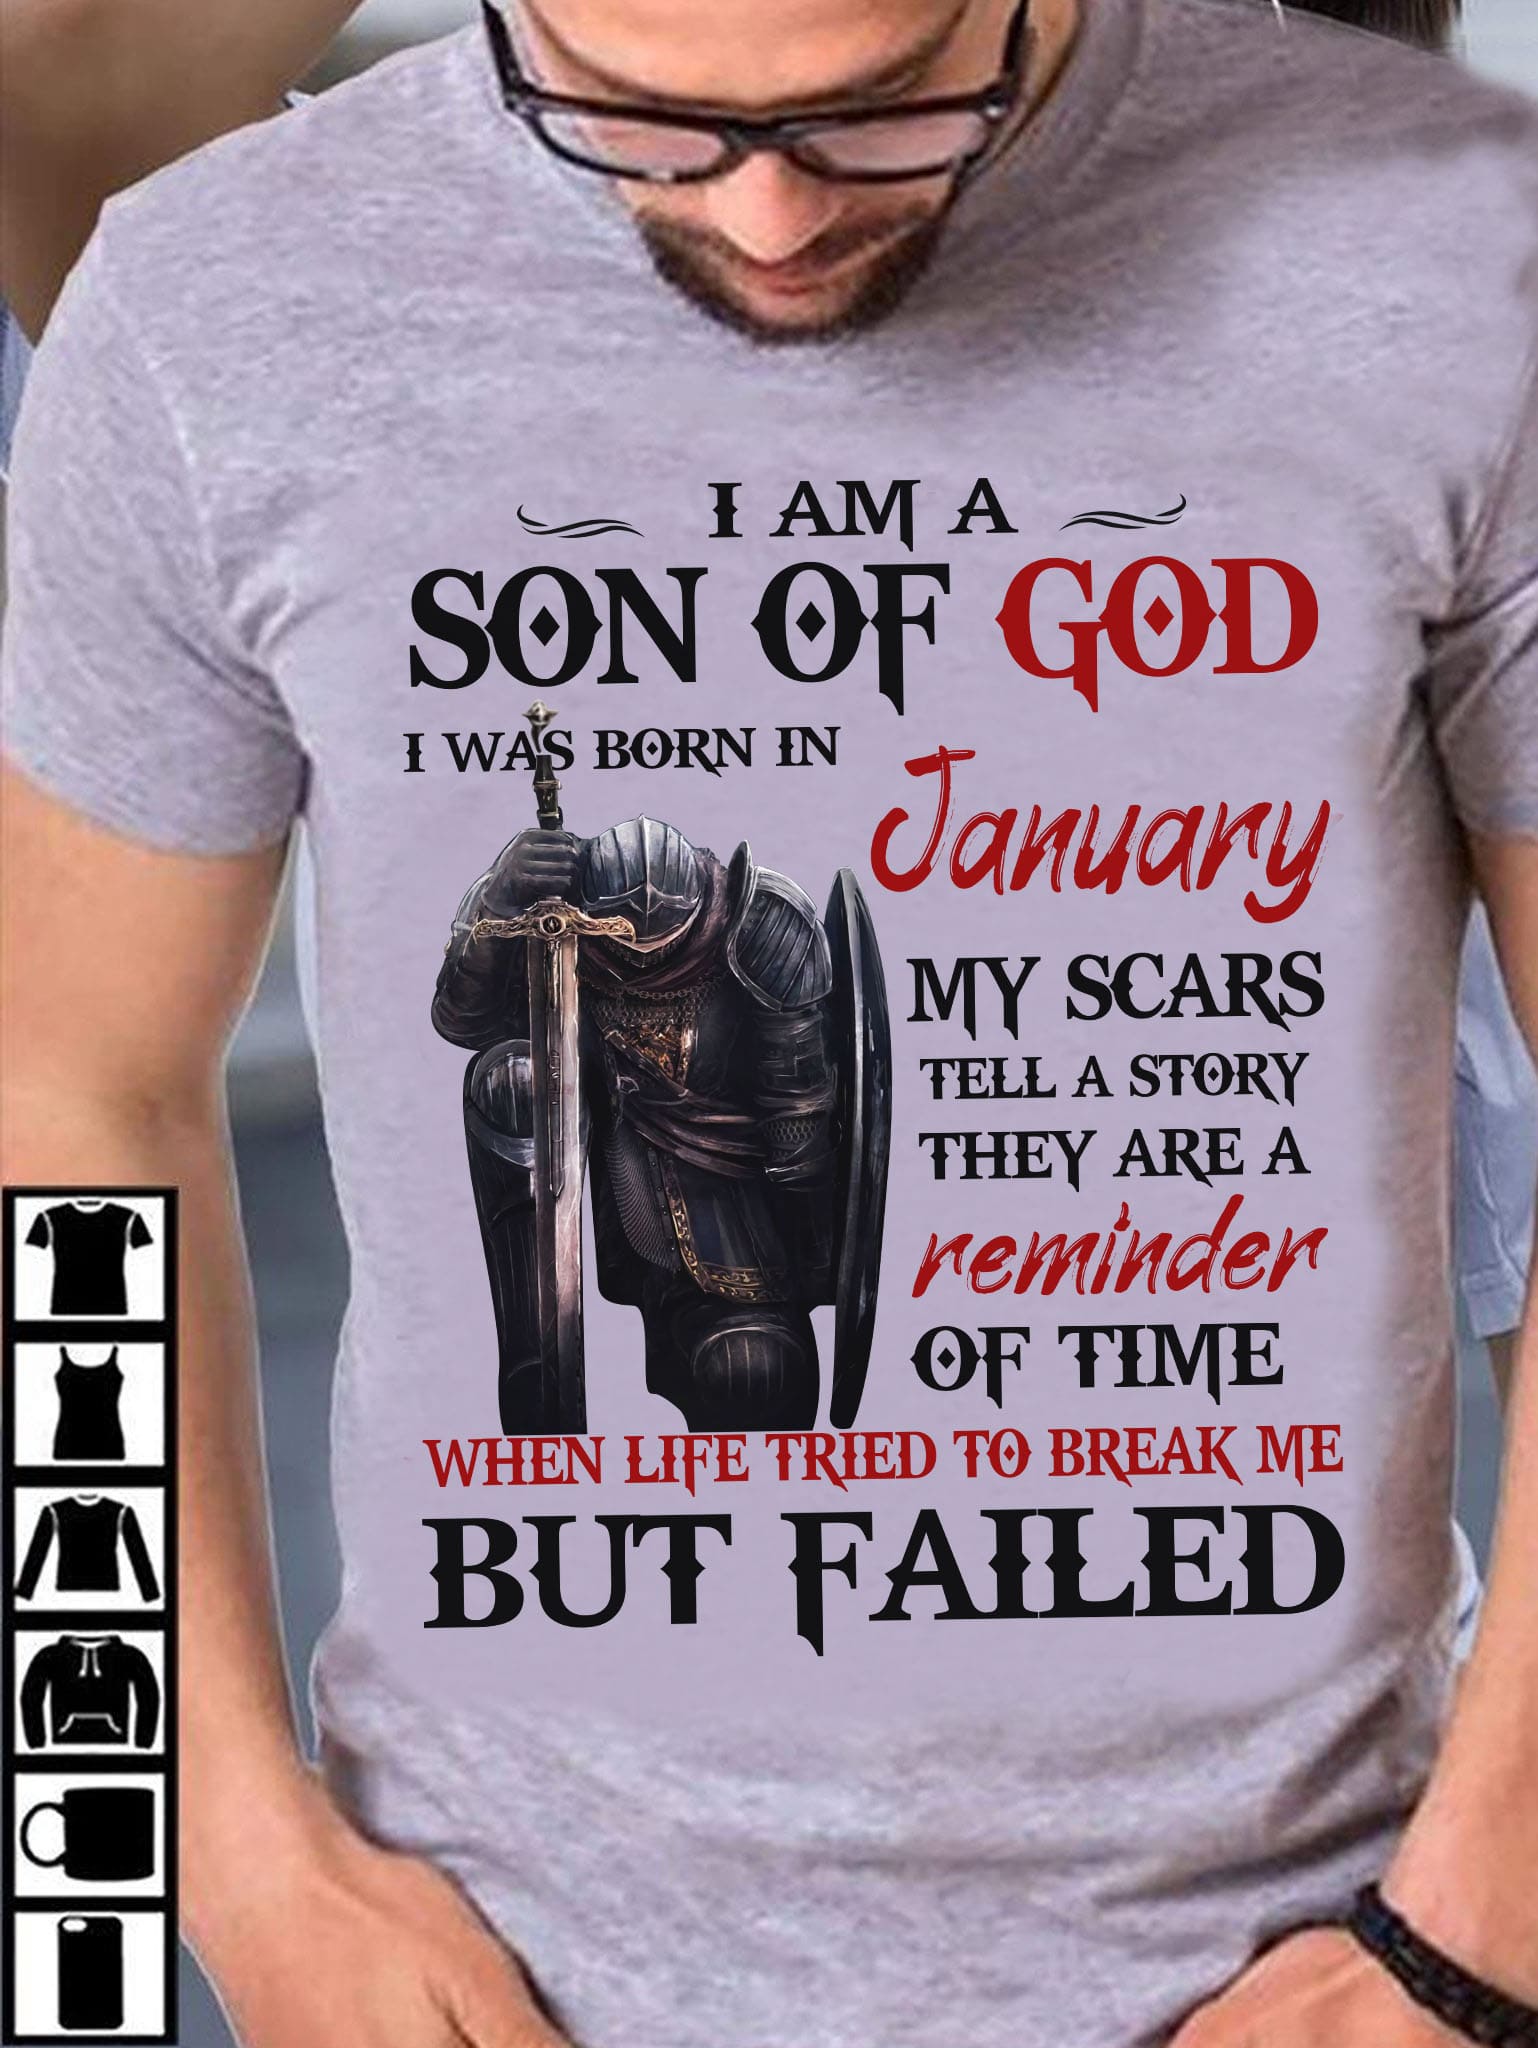 I am a Son of God I was born in January - January month of birthI am a Son of God I was born in January - January month of birth